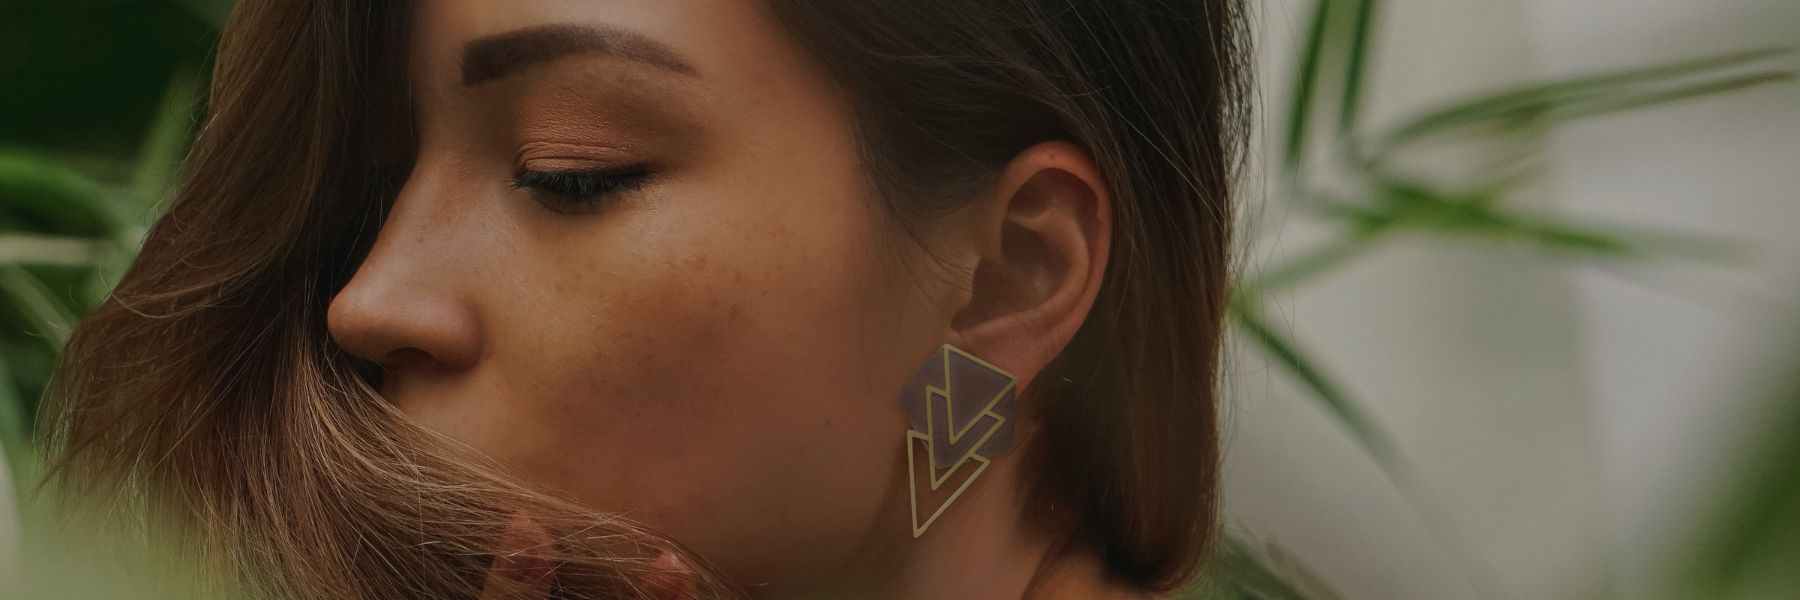 A woman is wearing earrings in upcycled leather and brass amidst foliage.